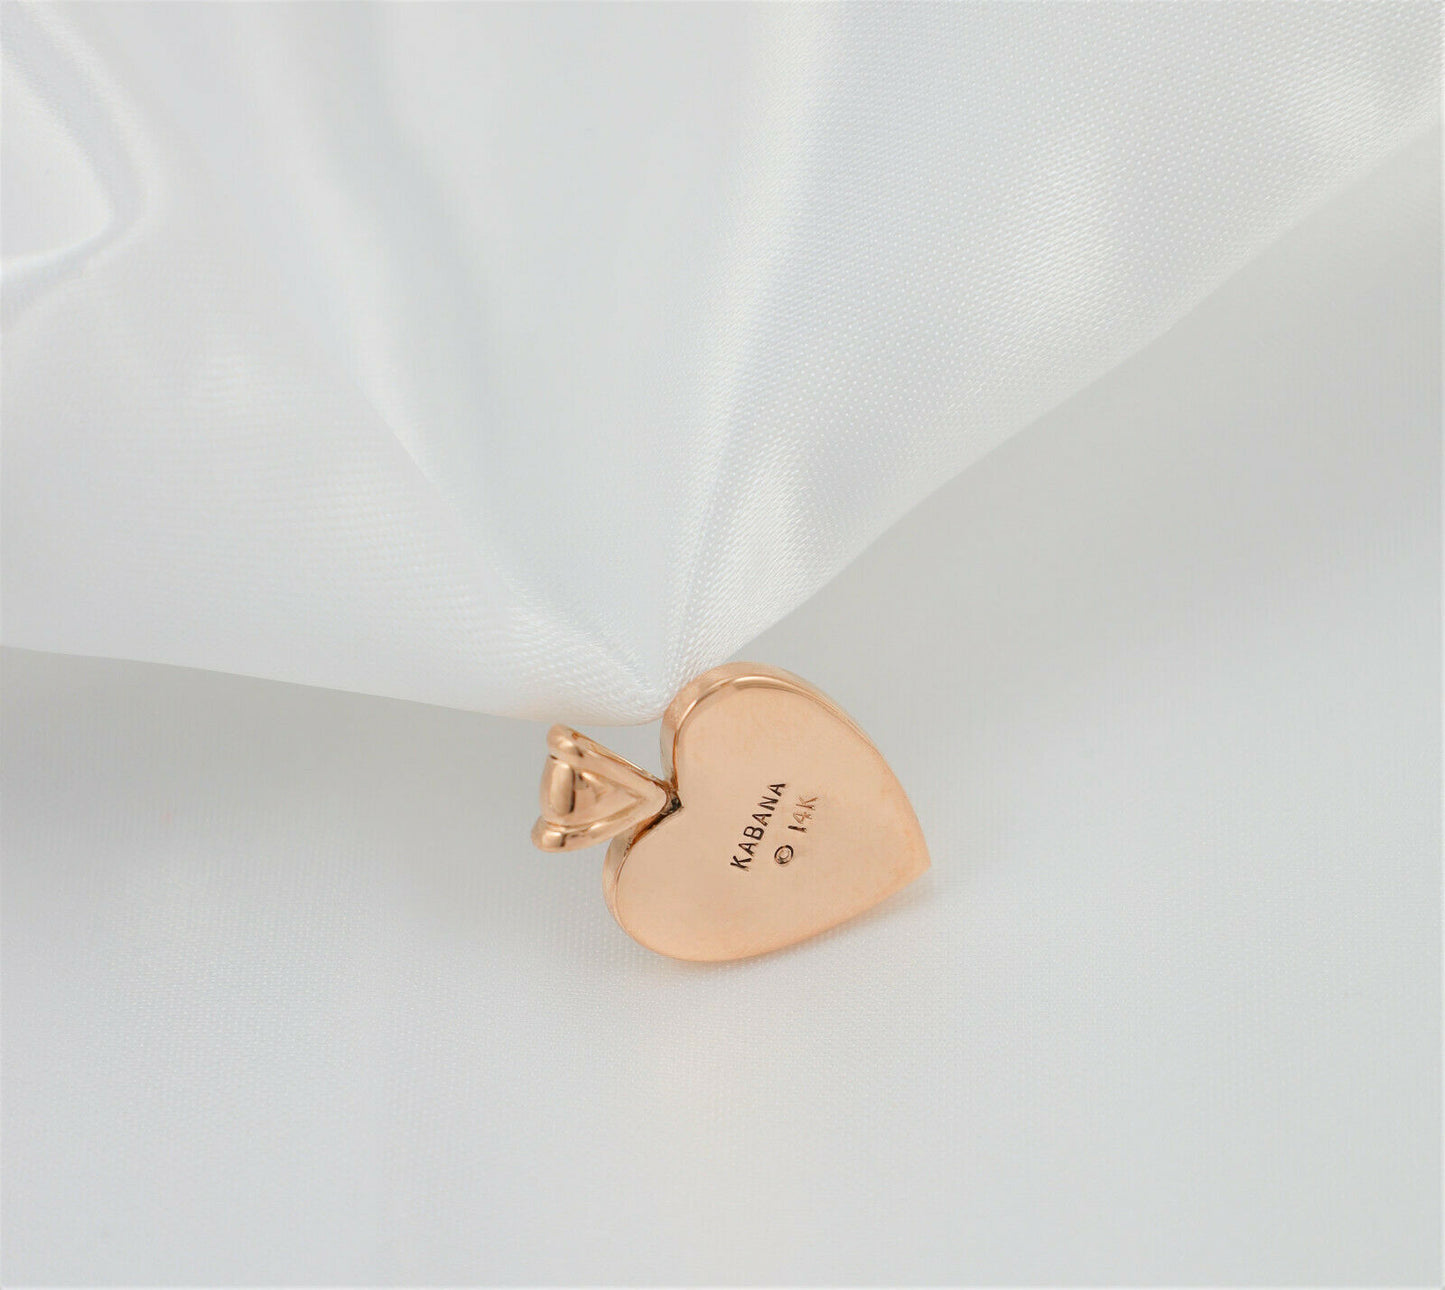 14k Rose Gold Kabana Heart Pendant with Pink Mother of Pearl Inlay - 6.0g